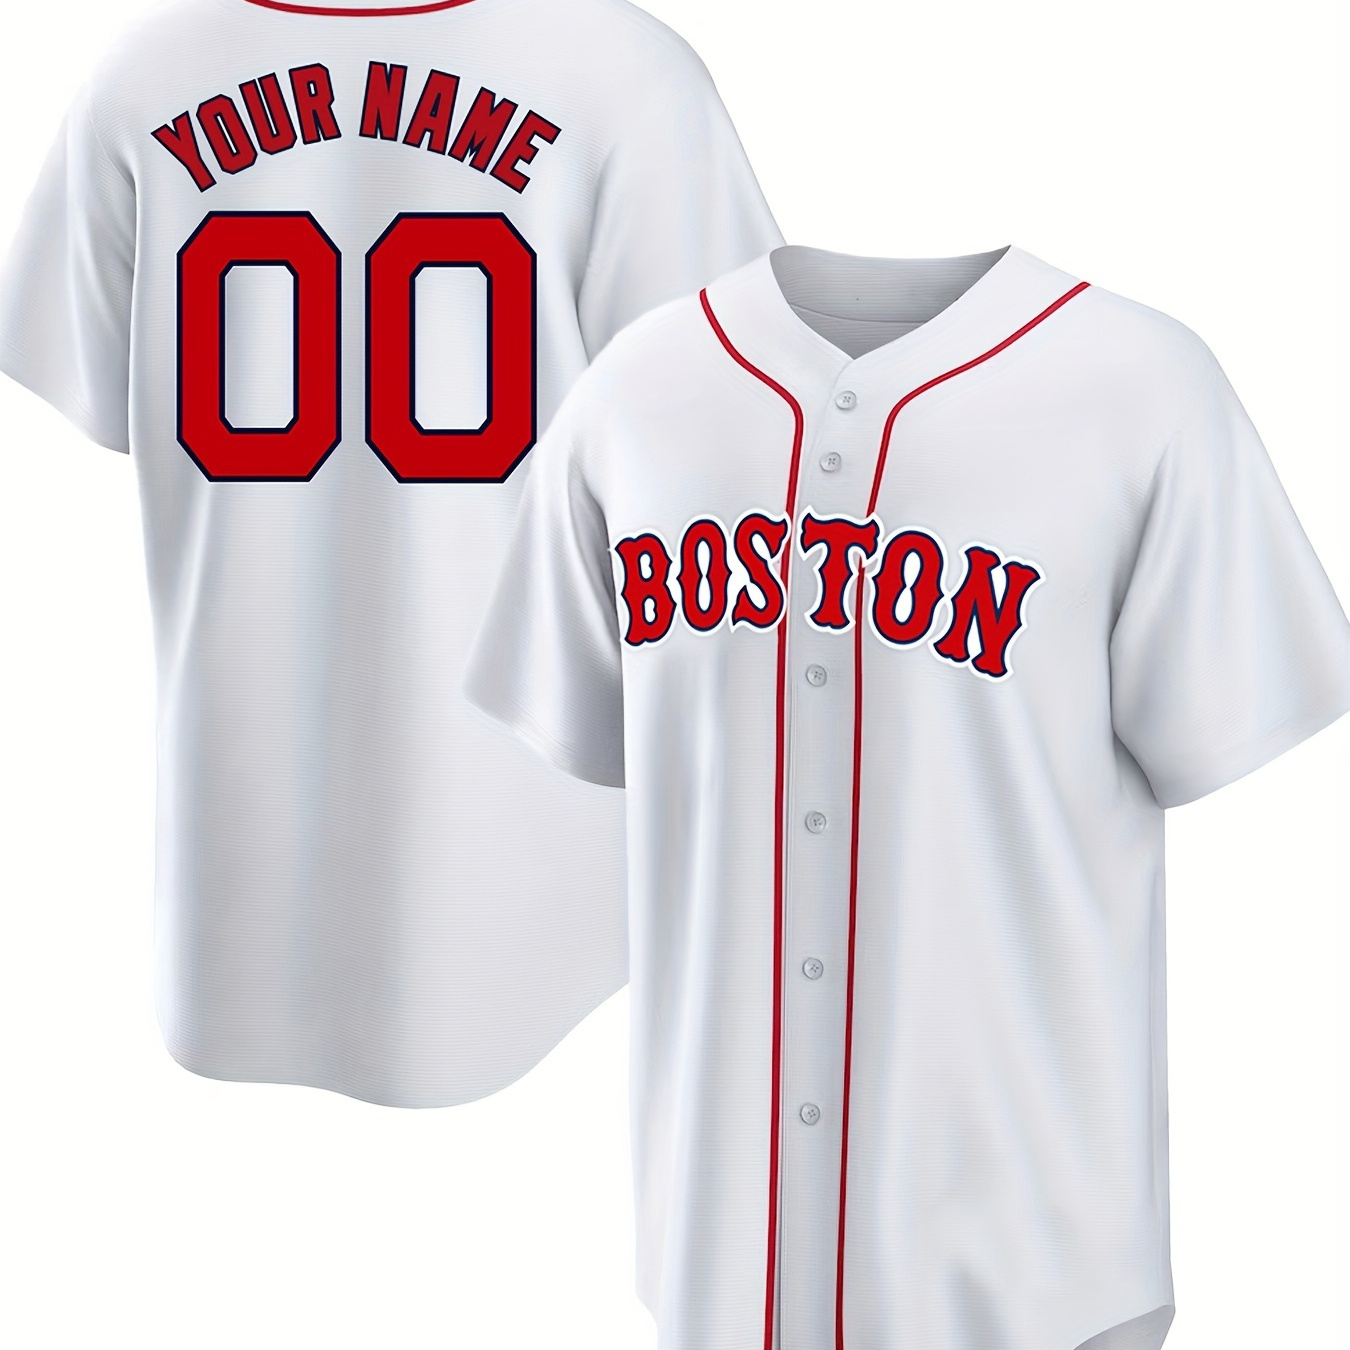 

Men's Customizable Name And Number Design Baseball Jersey Shirt, Boston Print Men's Embroidered Leisure Outdoor Sports Sweat Shirt For Match Party Training